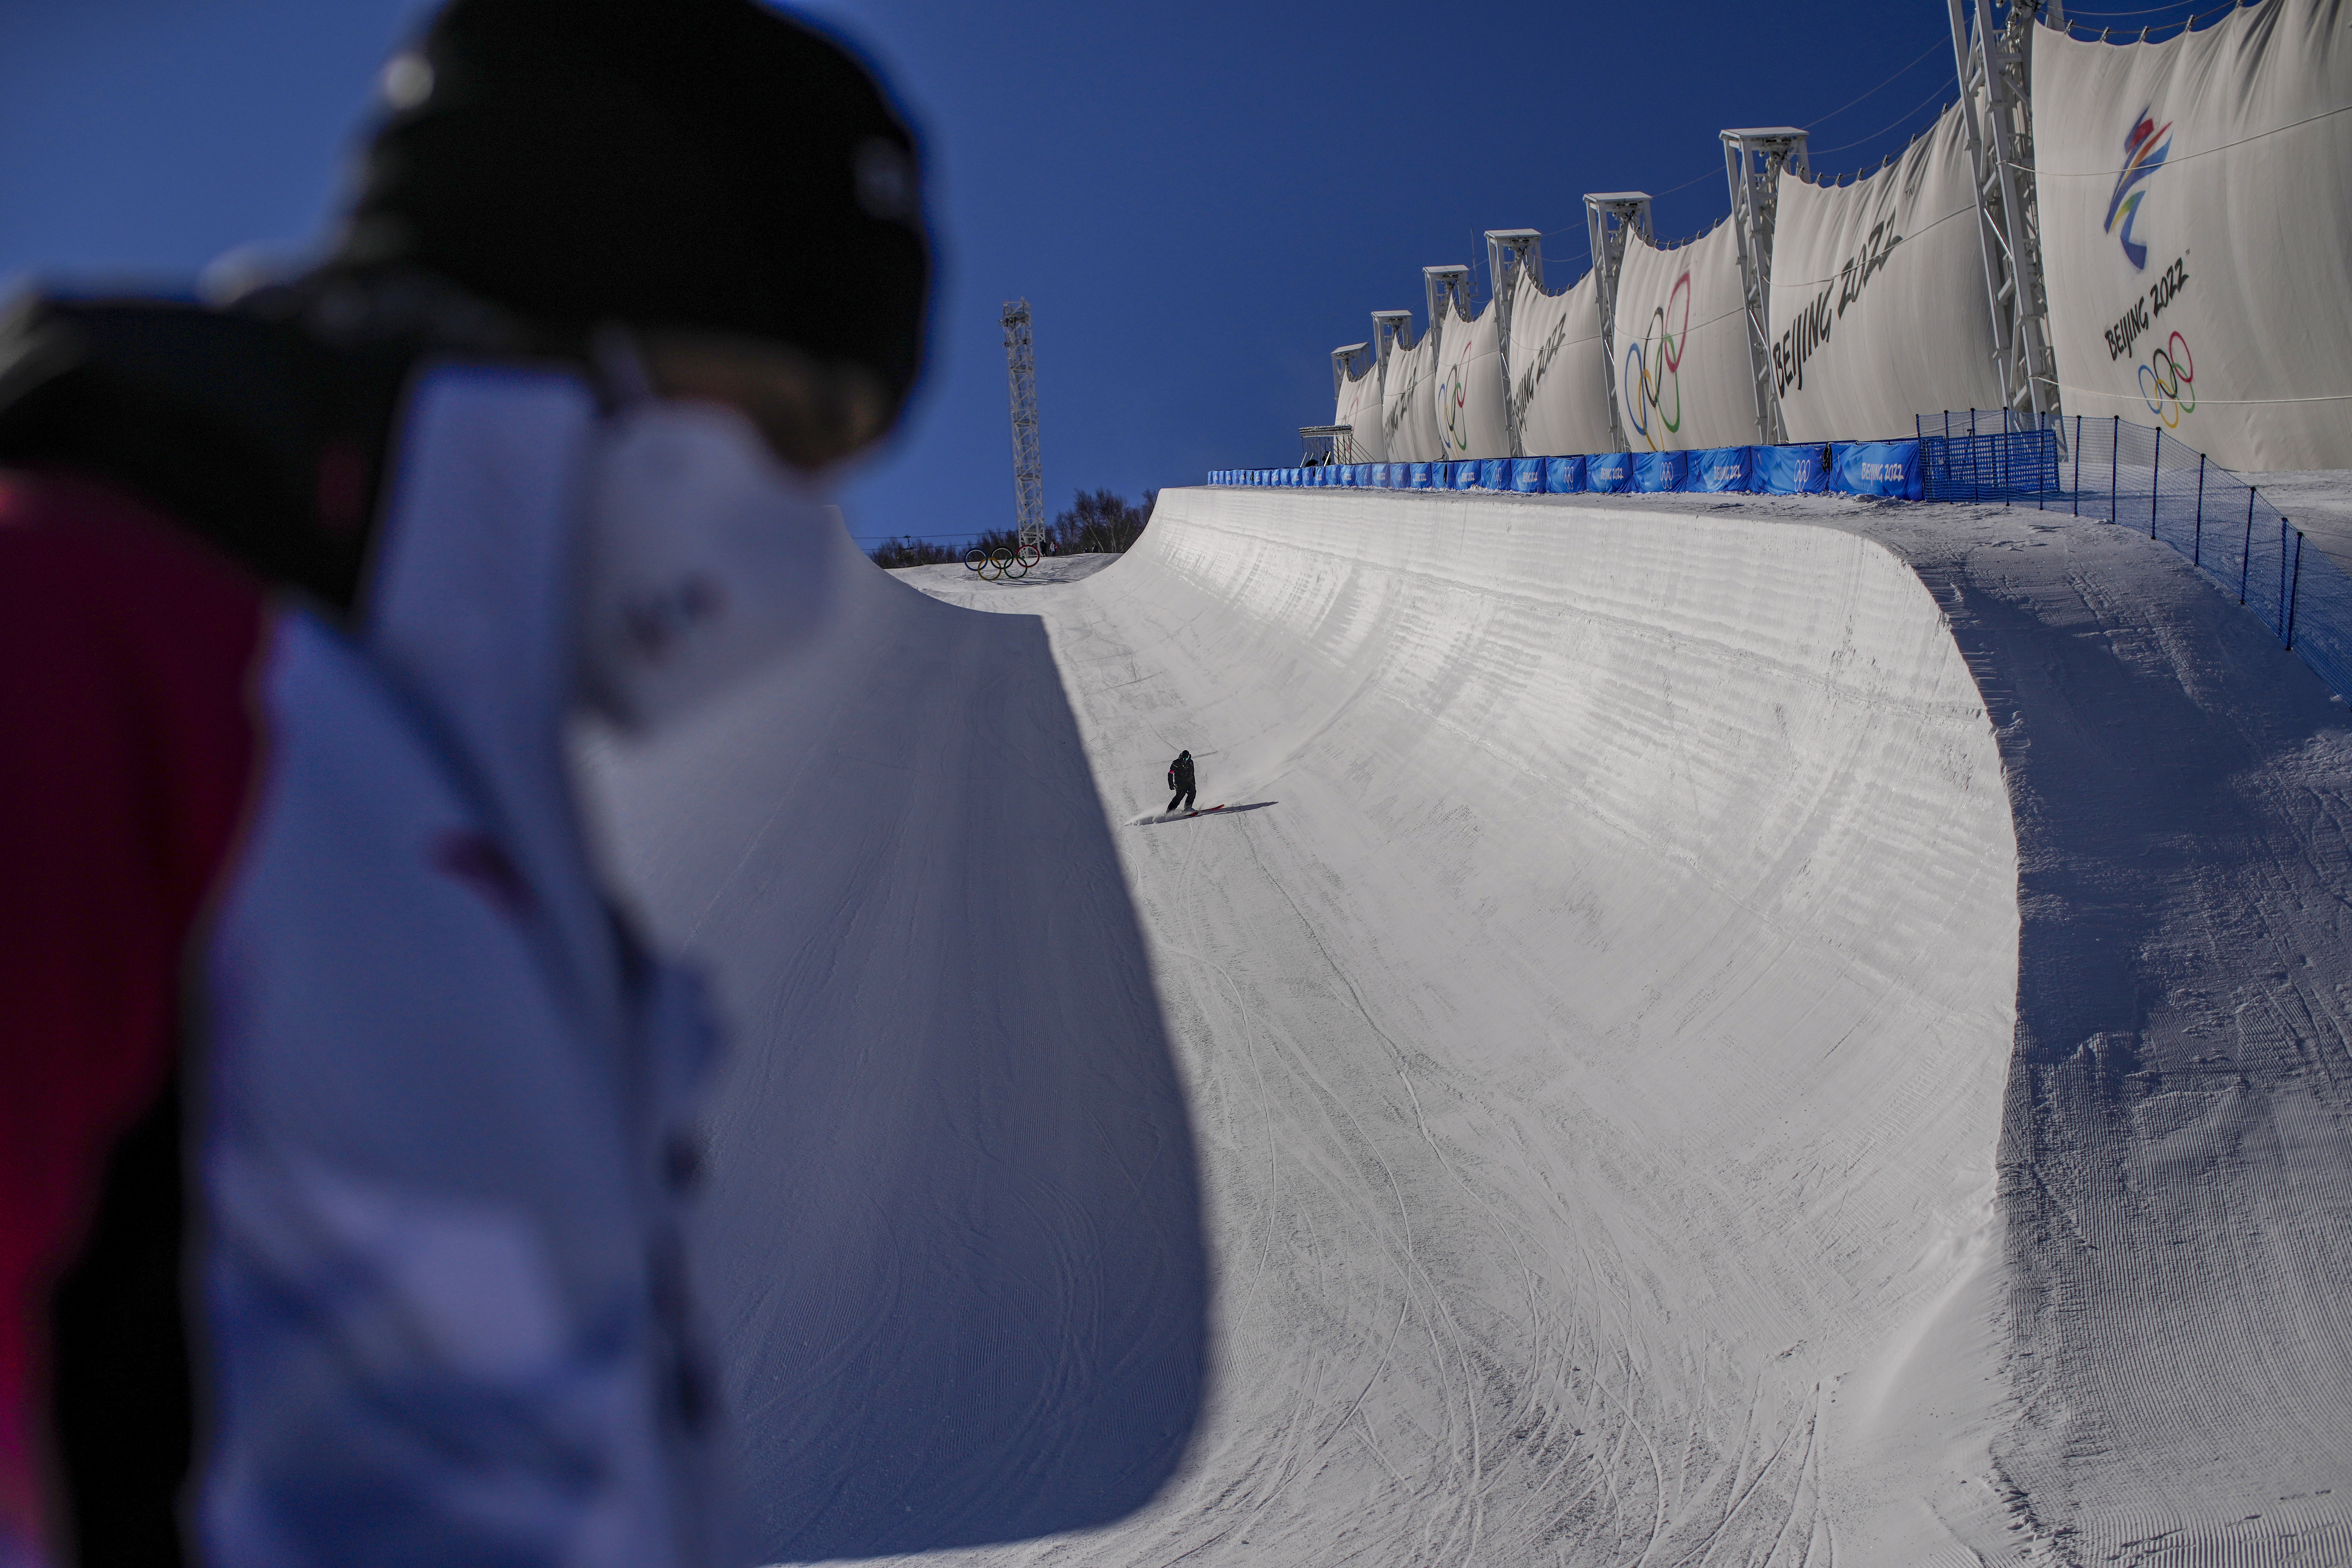 EXPLAINER All those flips and twists on Olympic halfpipe